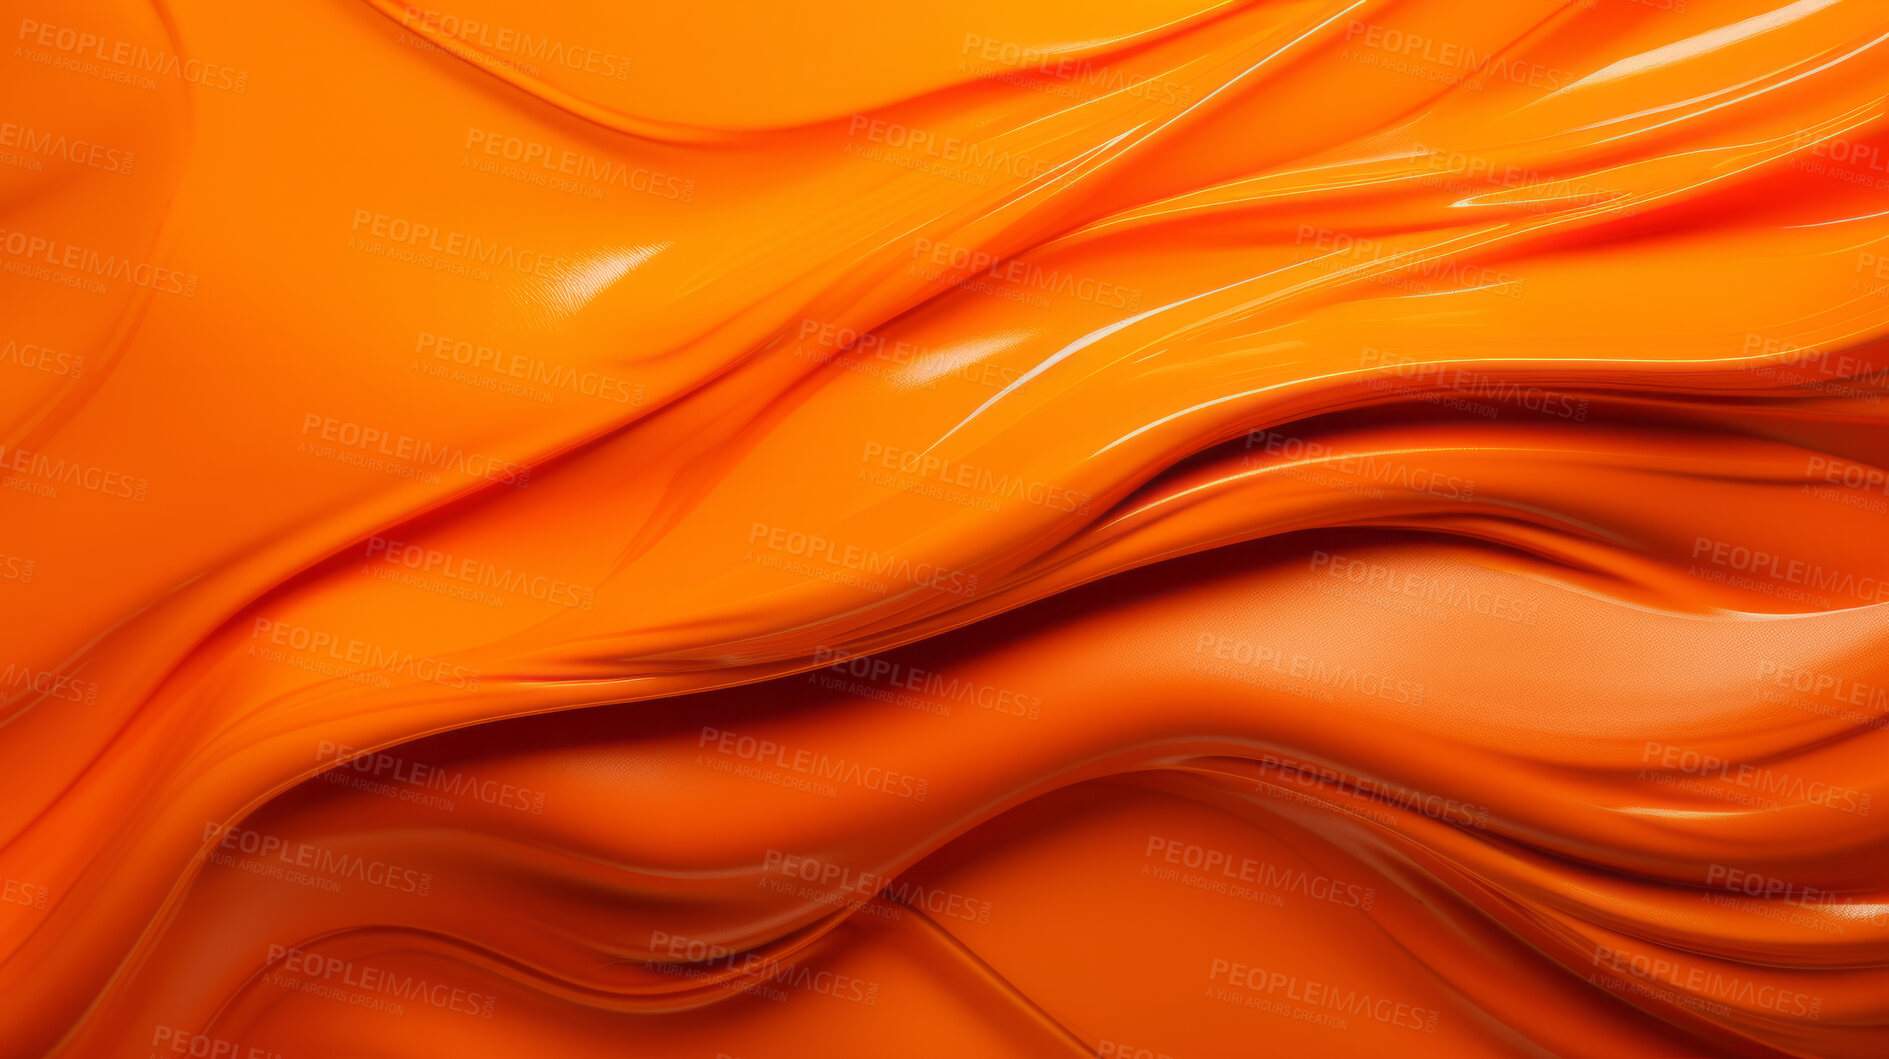 Buy stock photo Orange smooth paint texture close-up. Swirl abstract background.